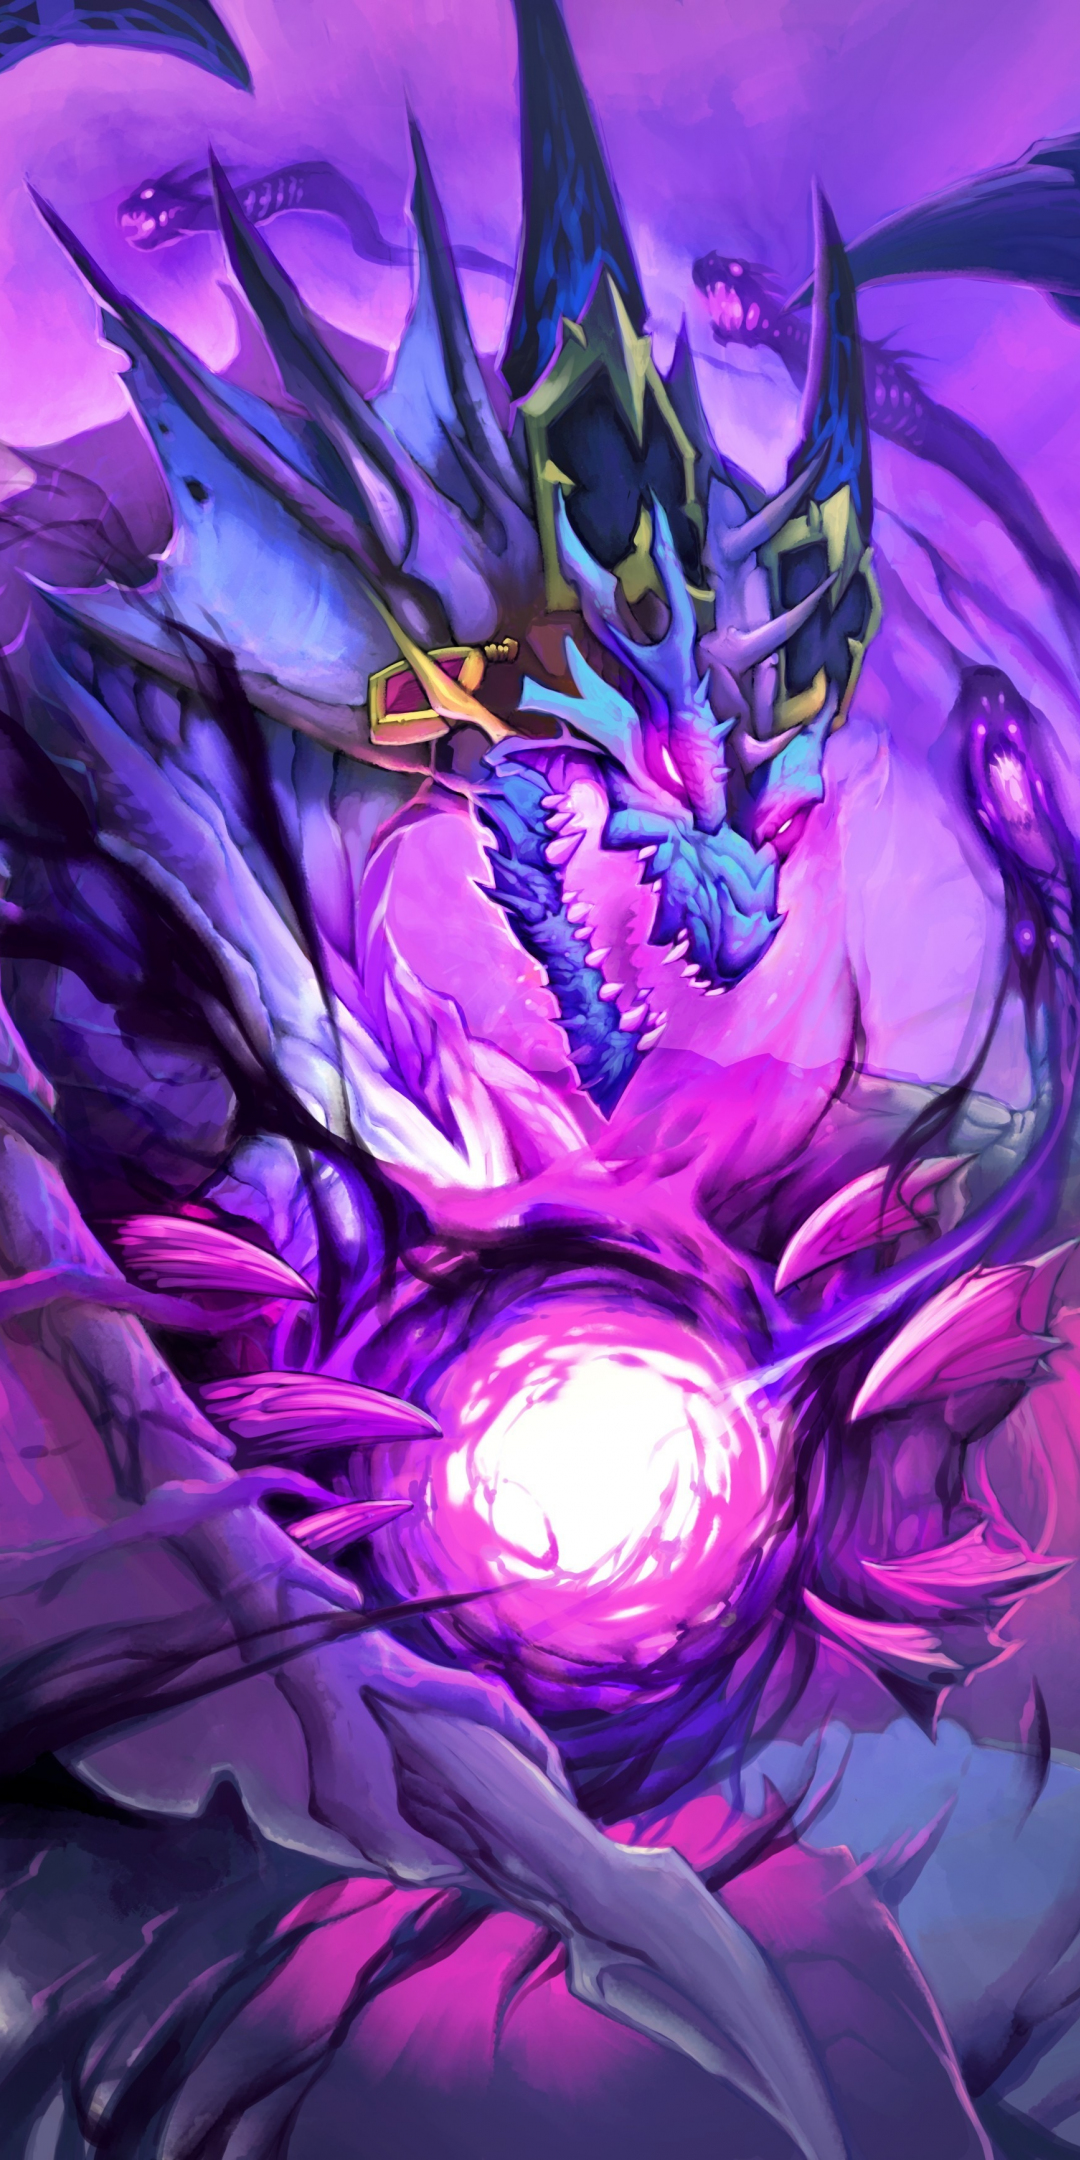 Dragon, Hearthstone: Kobolds And Catacombs, game, 1080x2160 wallpaper